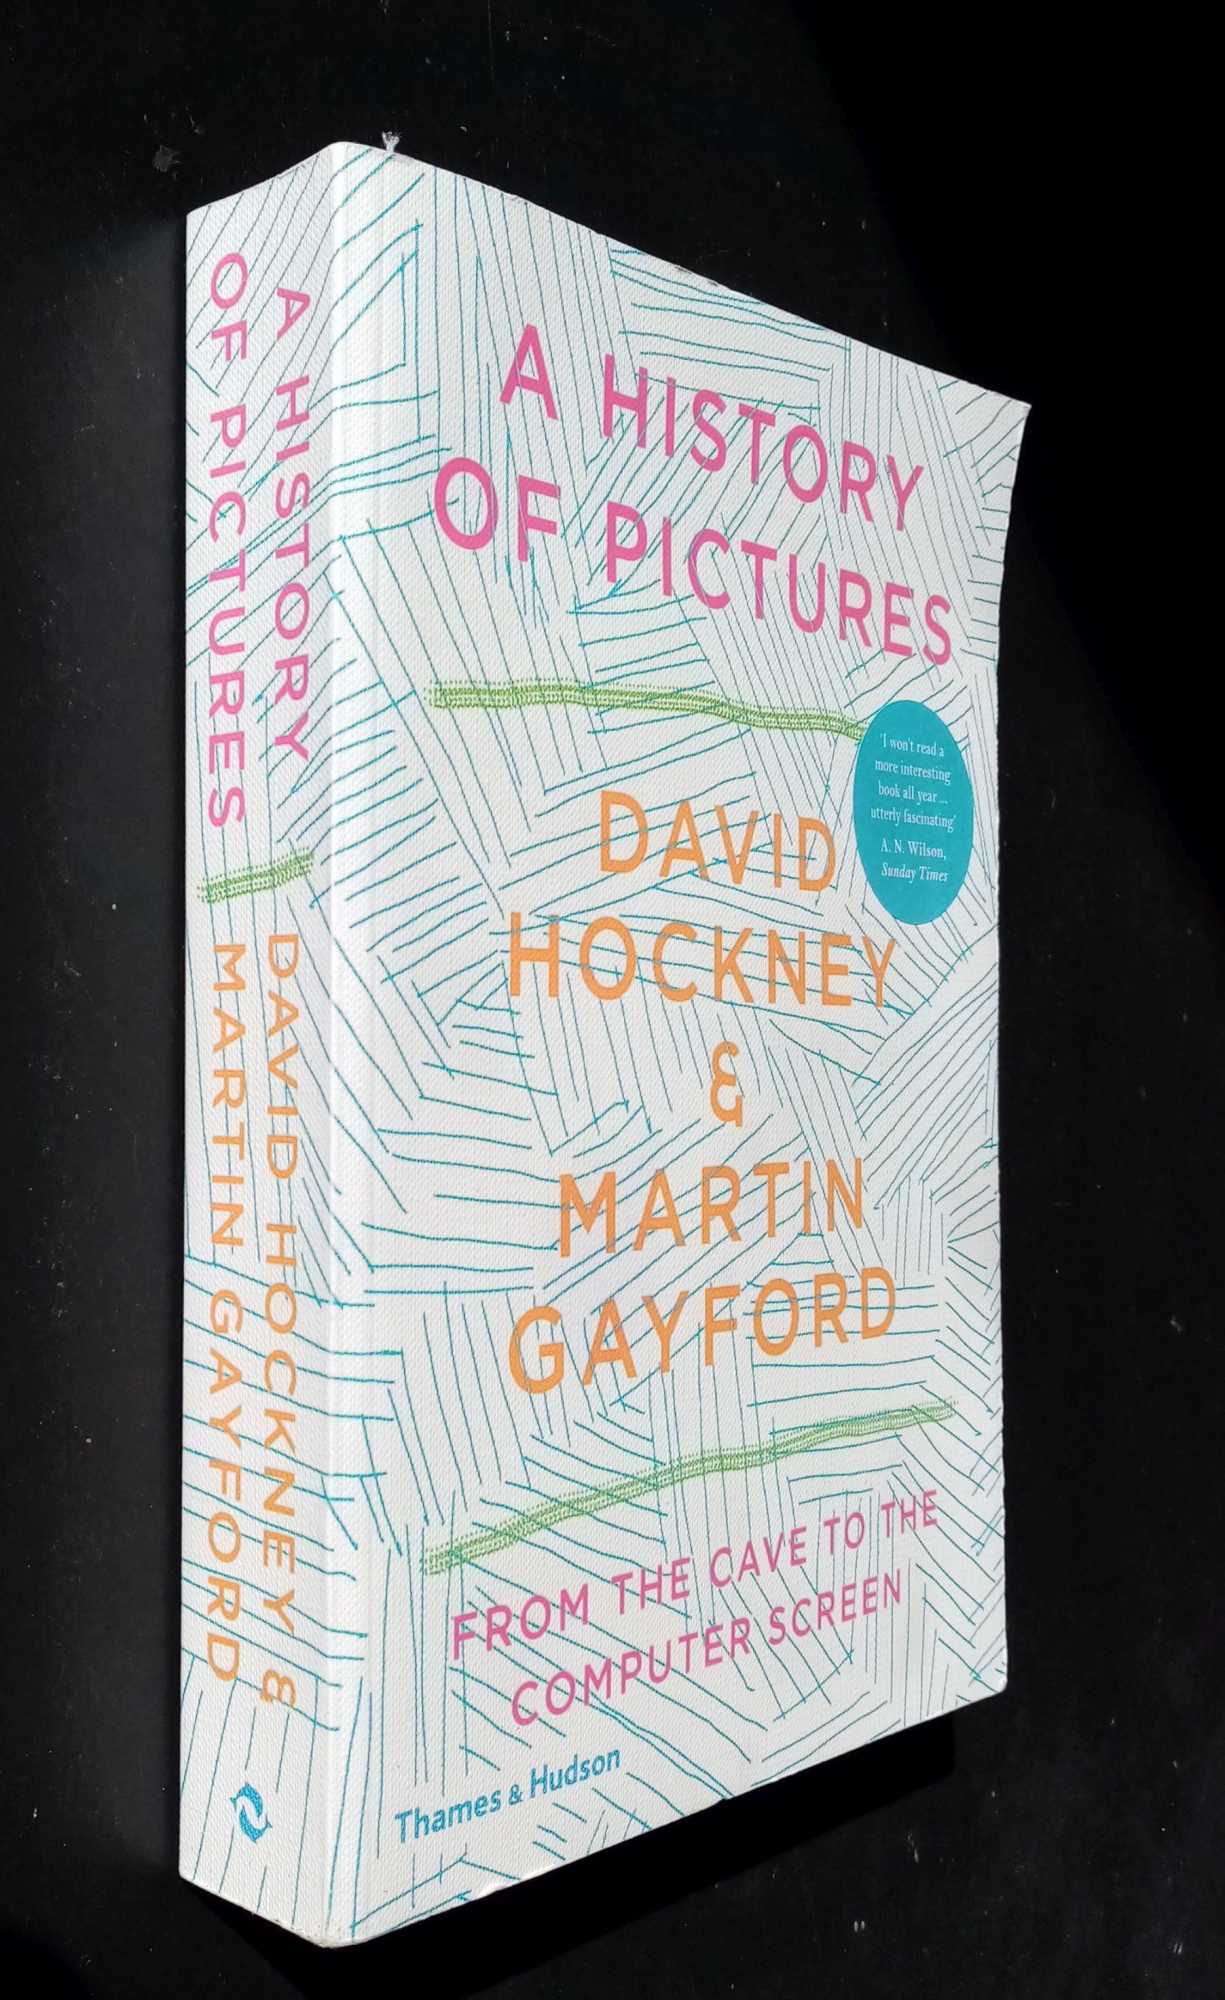 David Hockney, Martin Gayford - A History of Pictures: From the Cave to the Computer Screen